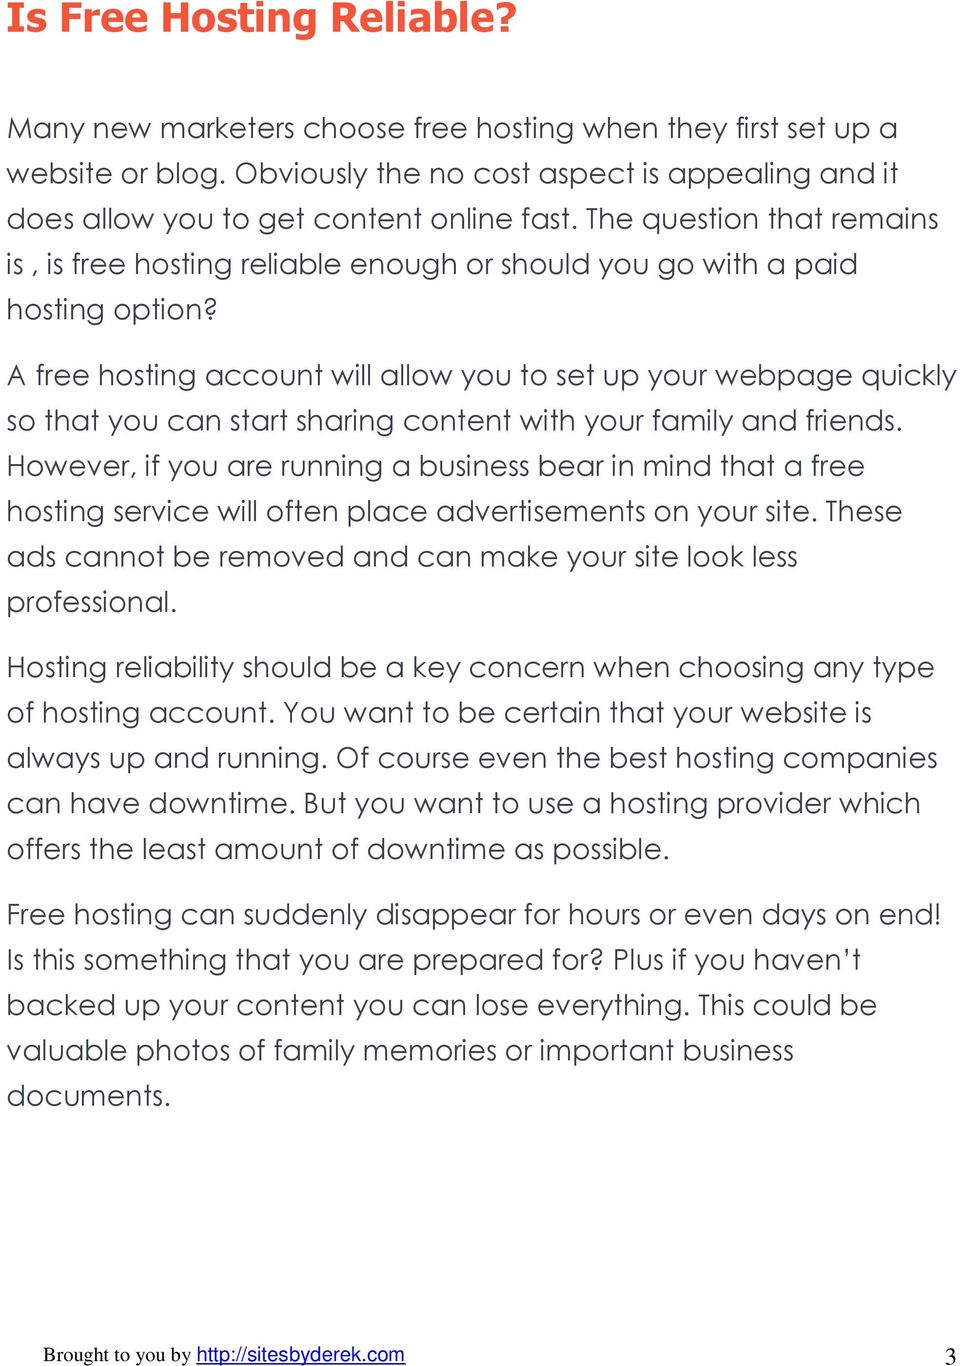 A free hosting account will allow you to set up your webpage quickly so that you can start sharing content with your family and friends.